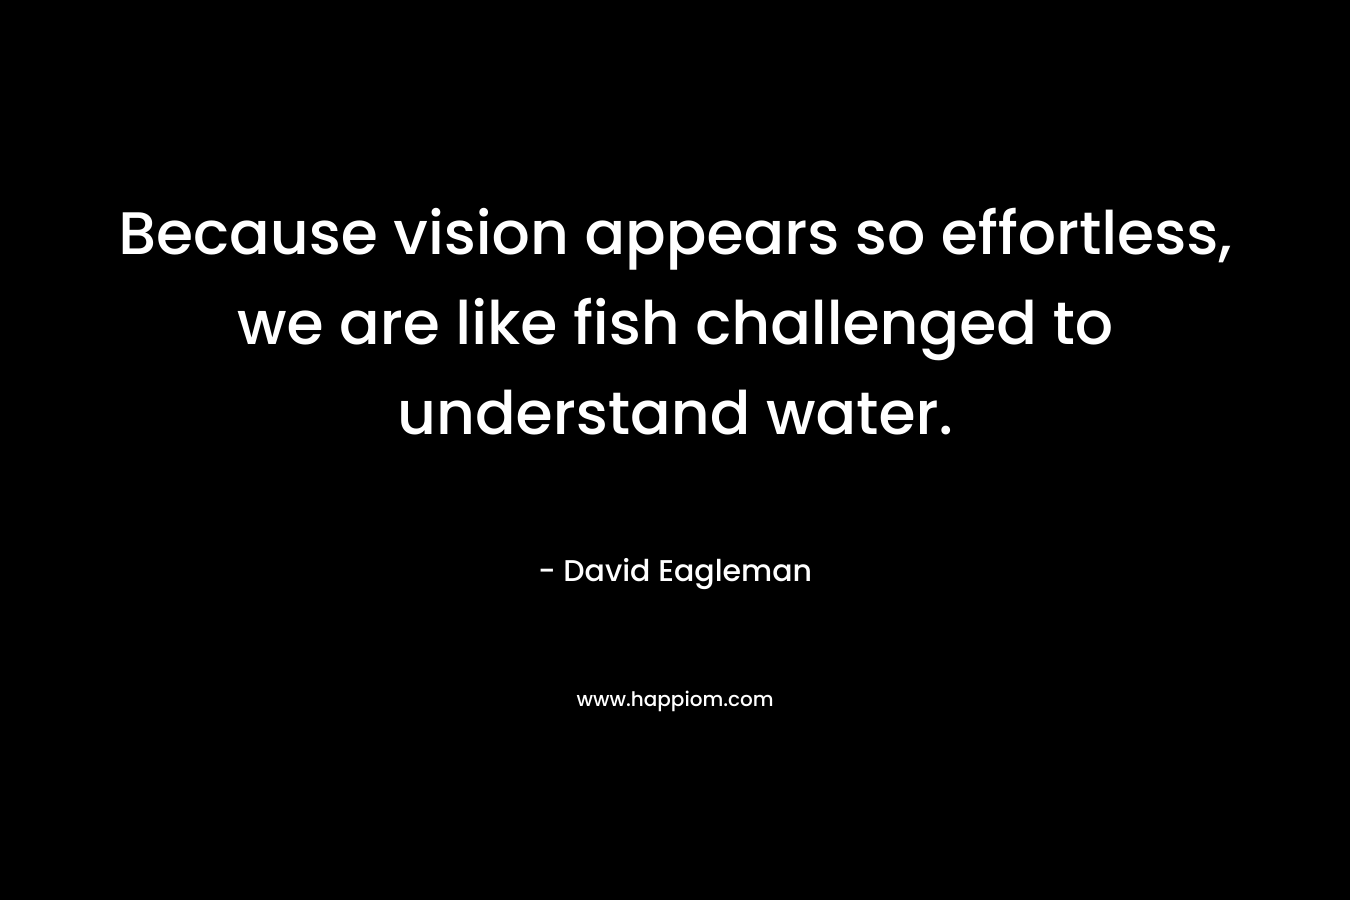 Because vision appears so effortless, we are like fish challenged to understand water.